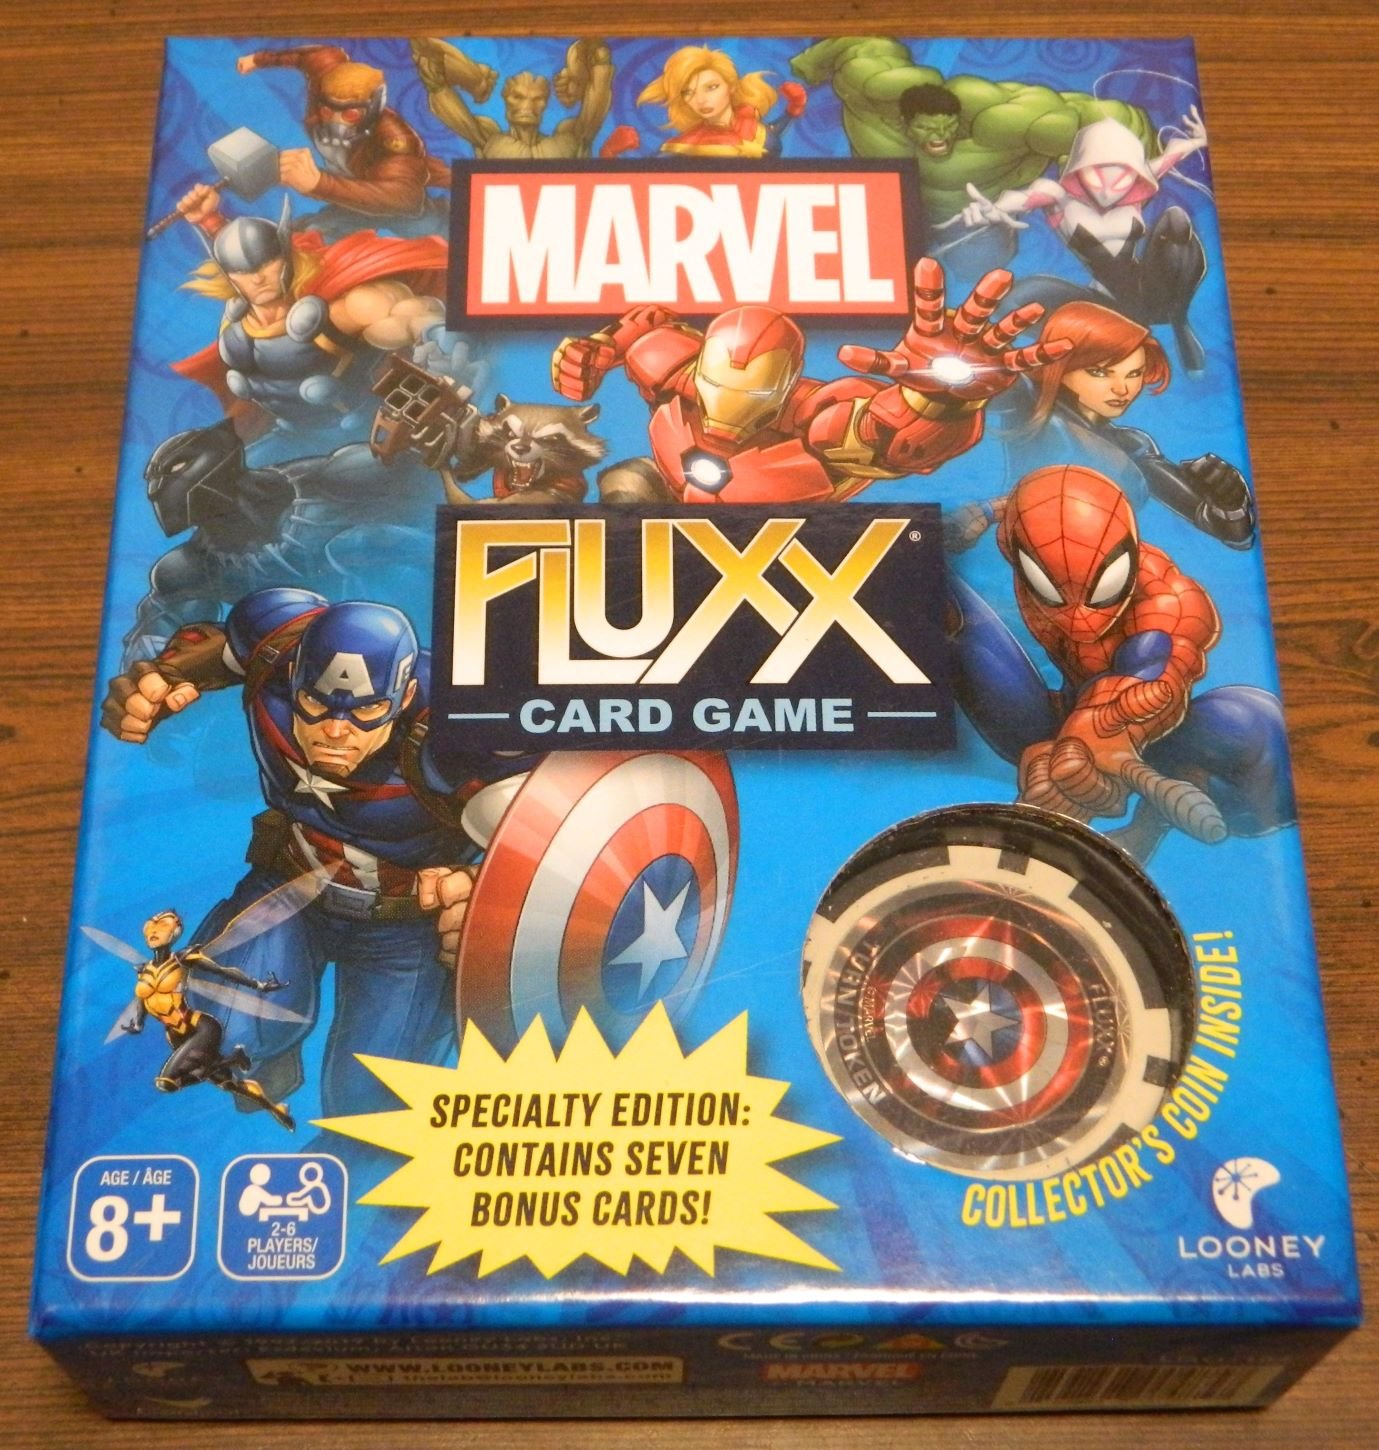 Marvel Fluxx Card Game Review and Rules